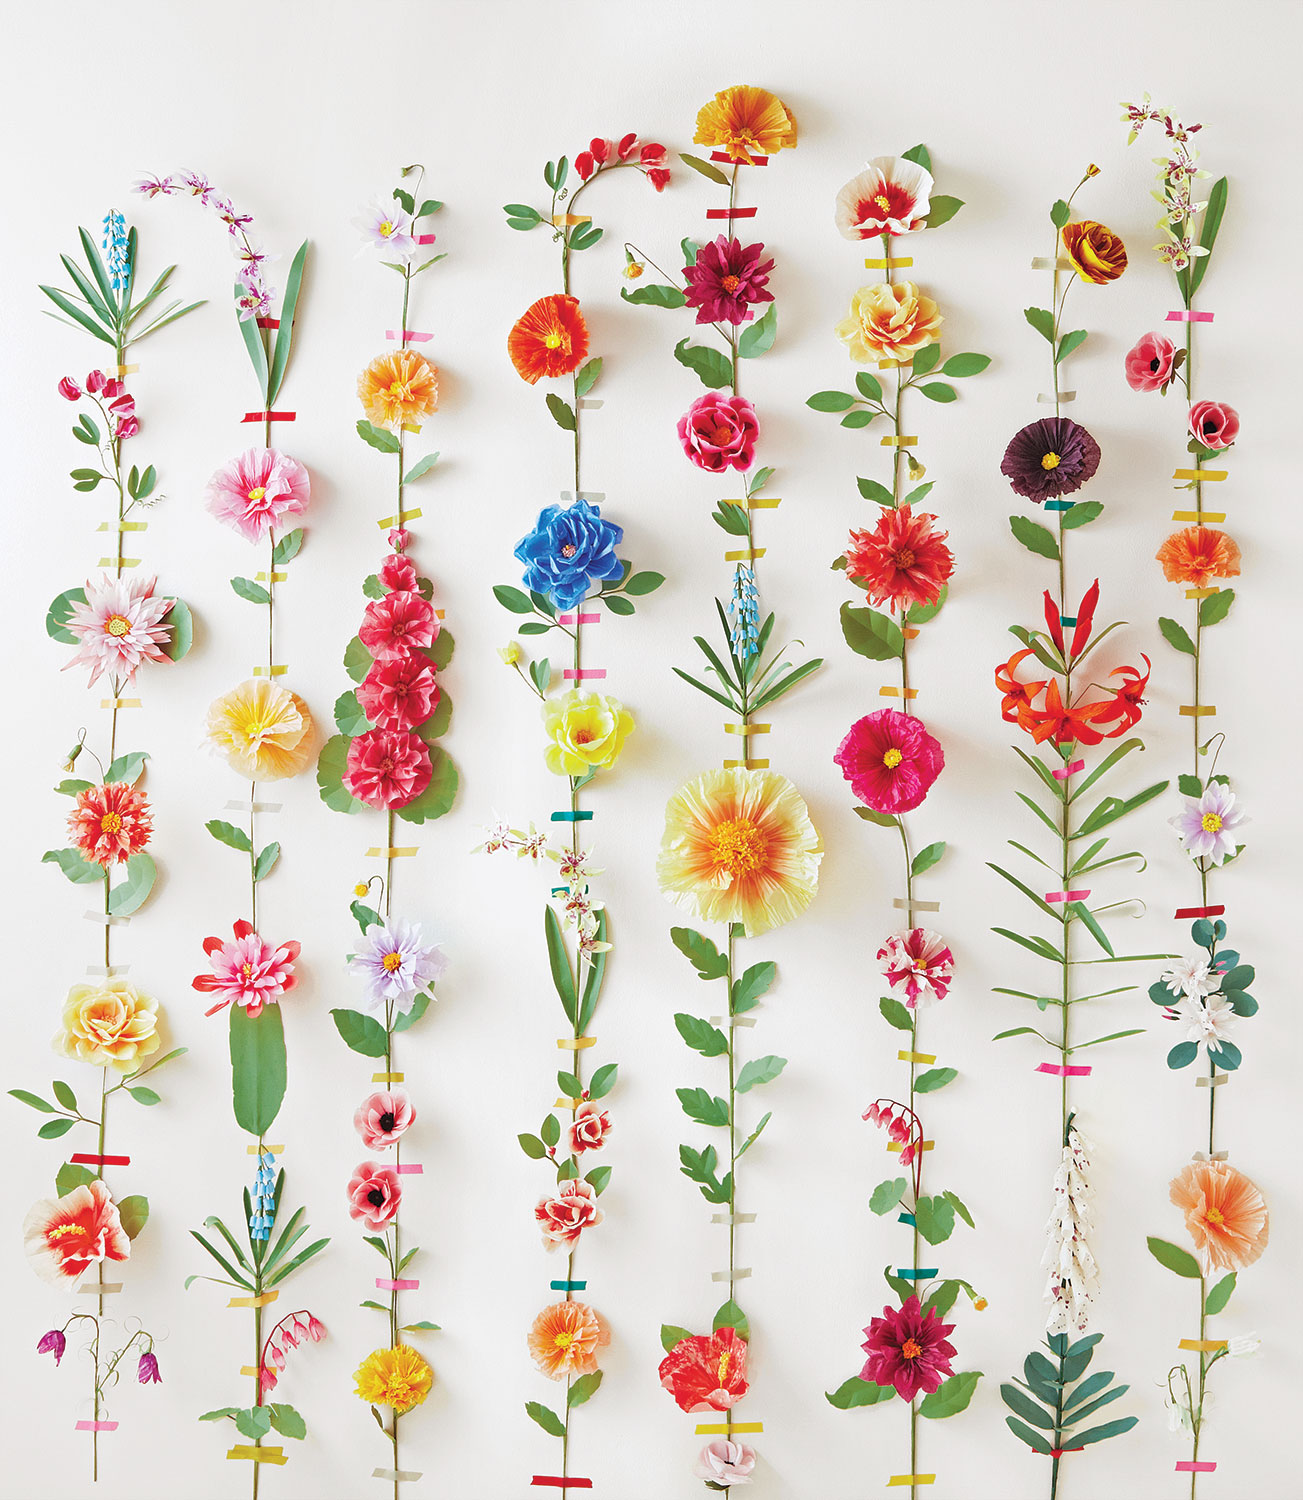 paper flowers by Livia Cetti